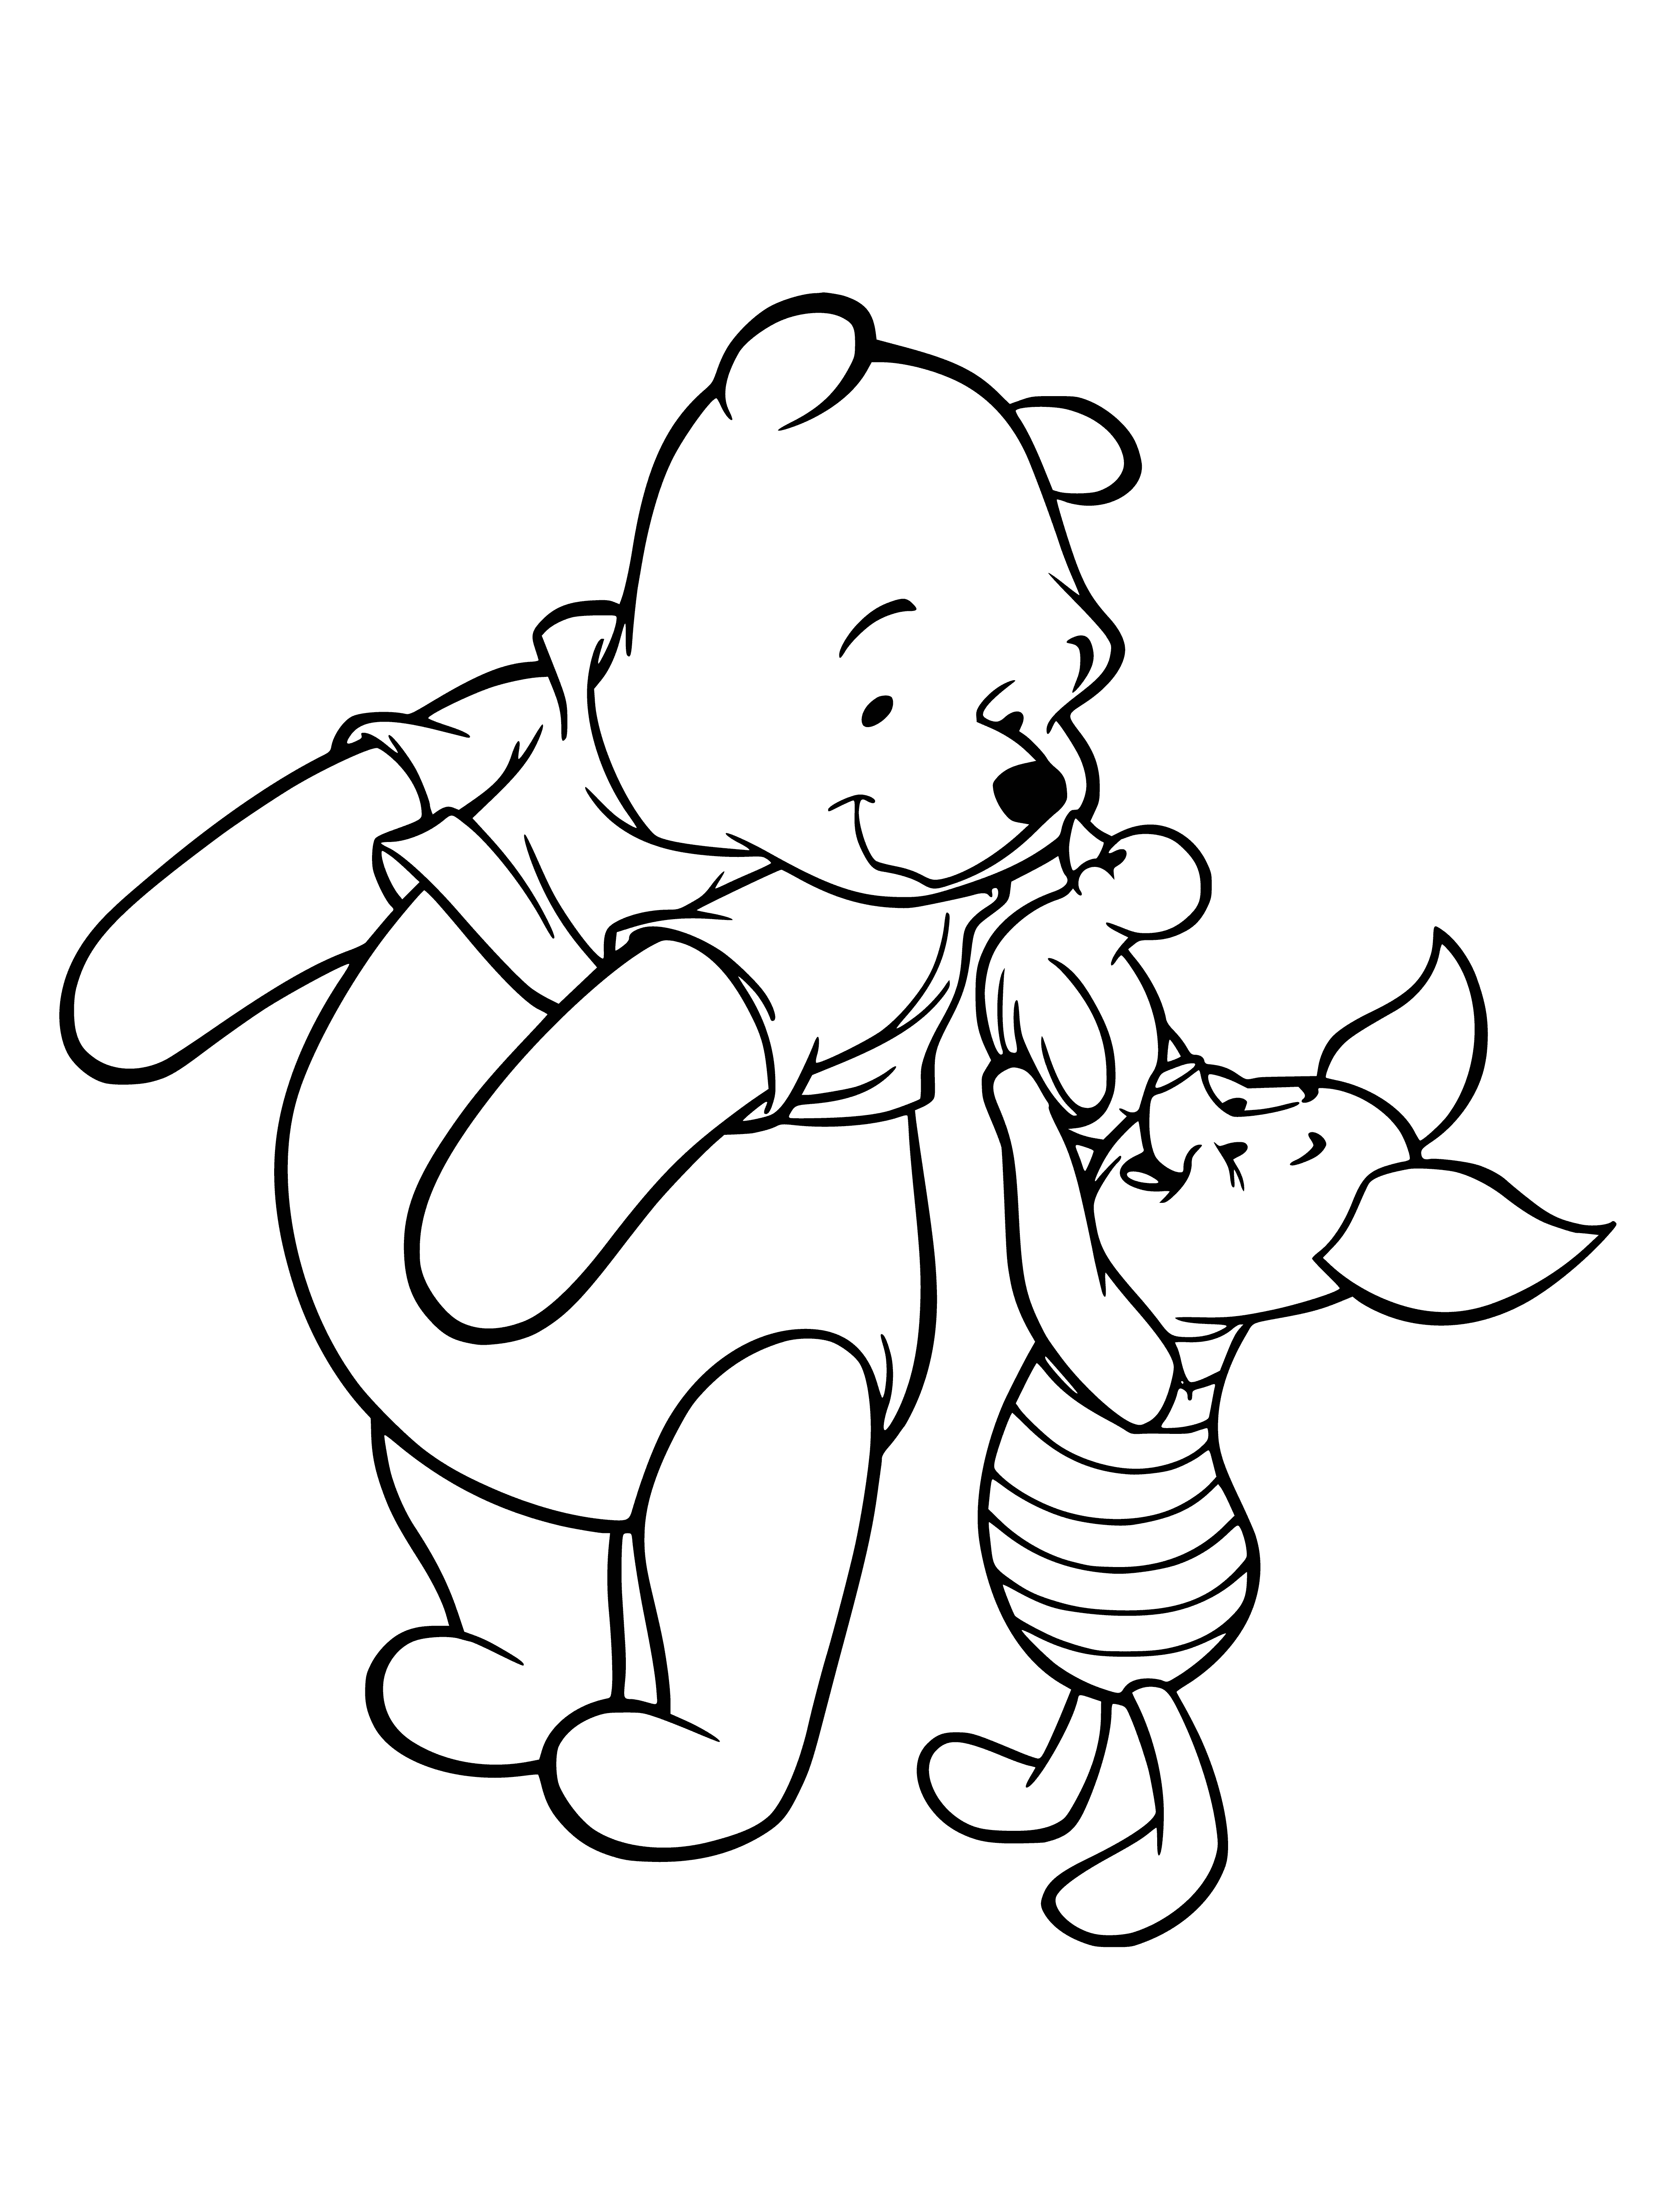 coloring page: Winnie the Pooh & Piglet smile, holding red & blue balloons. #ClassicDisney